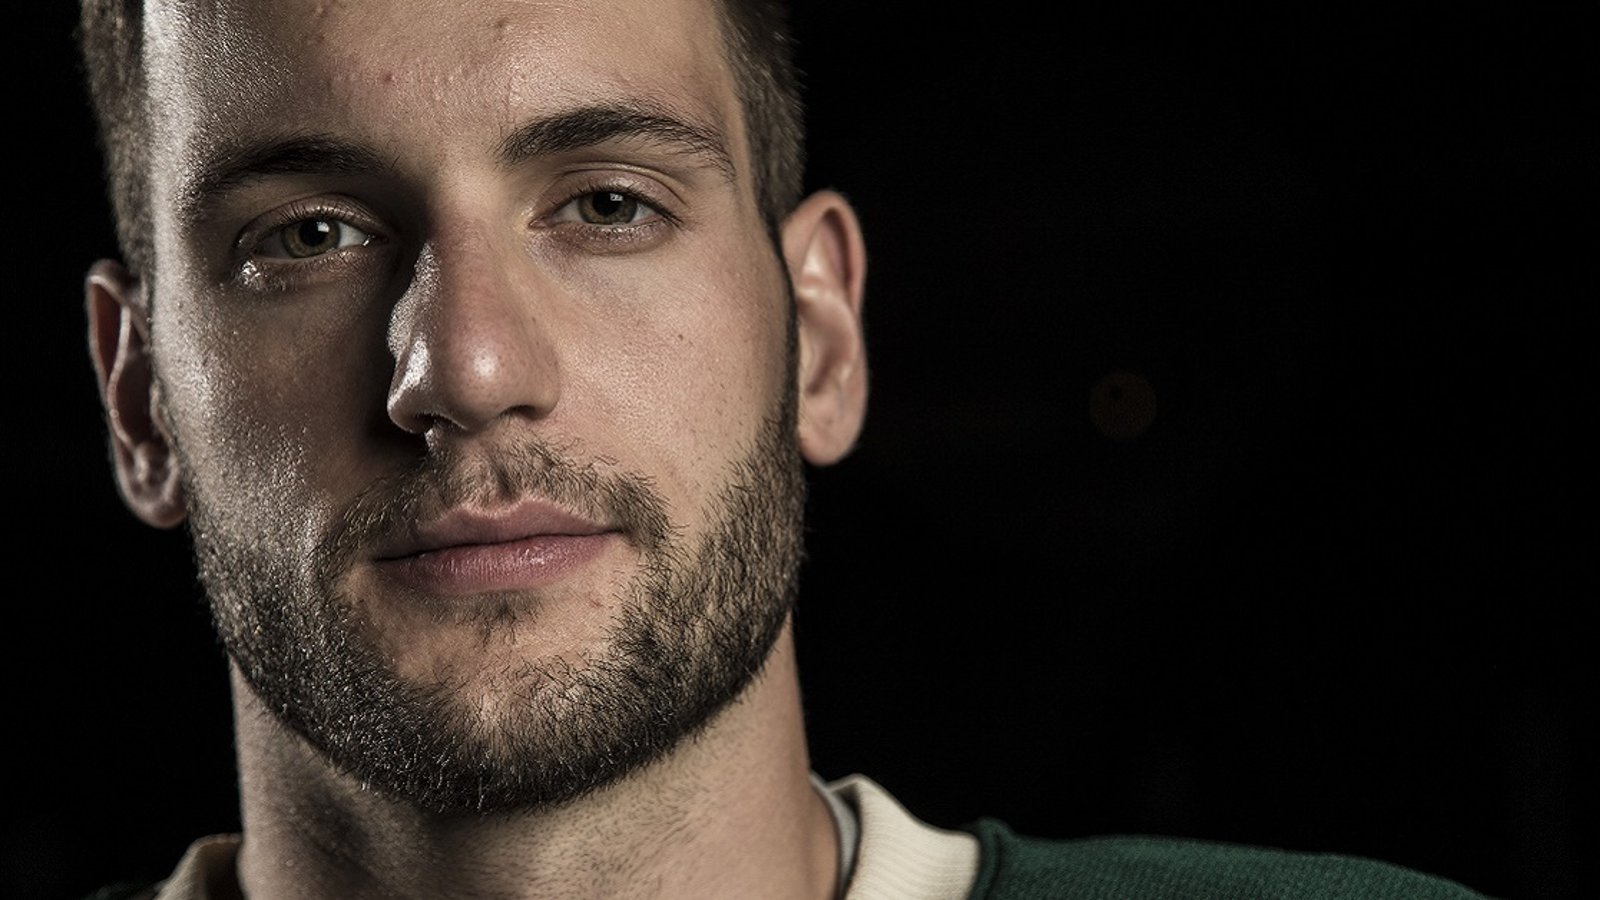 Breaking: Wild defenseman has surgery, but there is some good news.